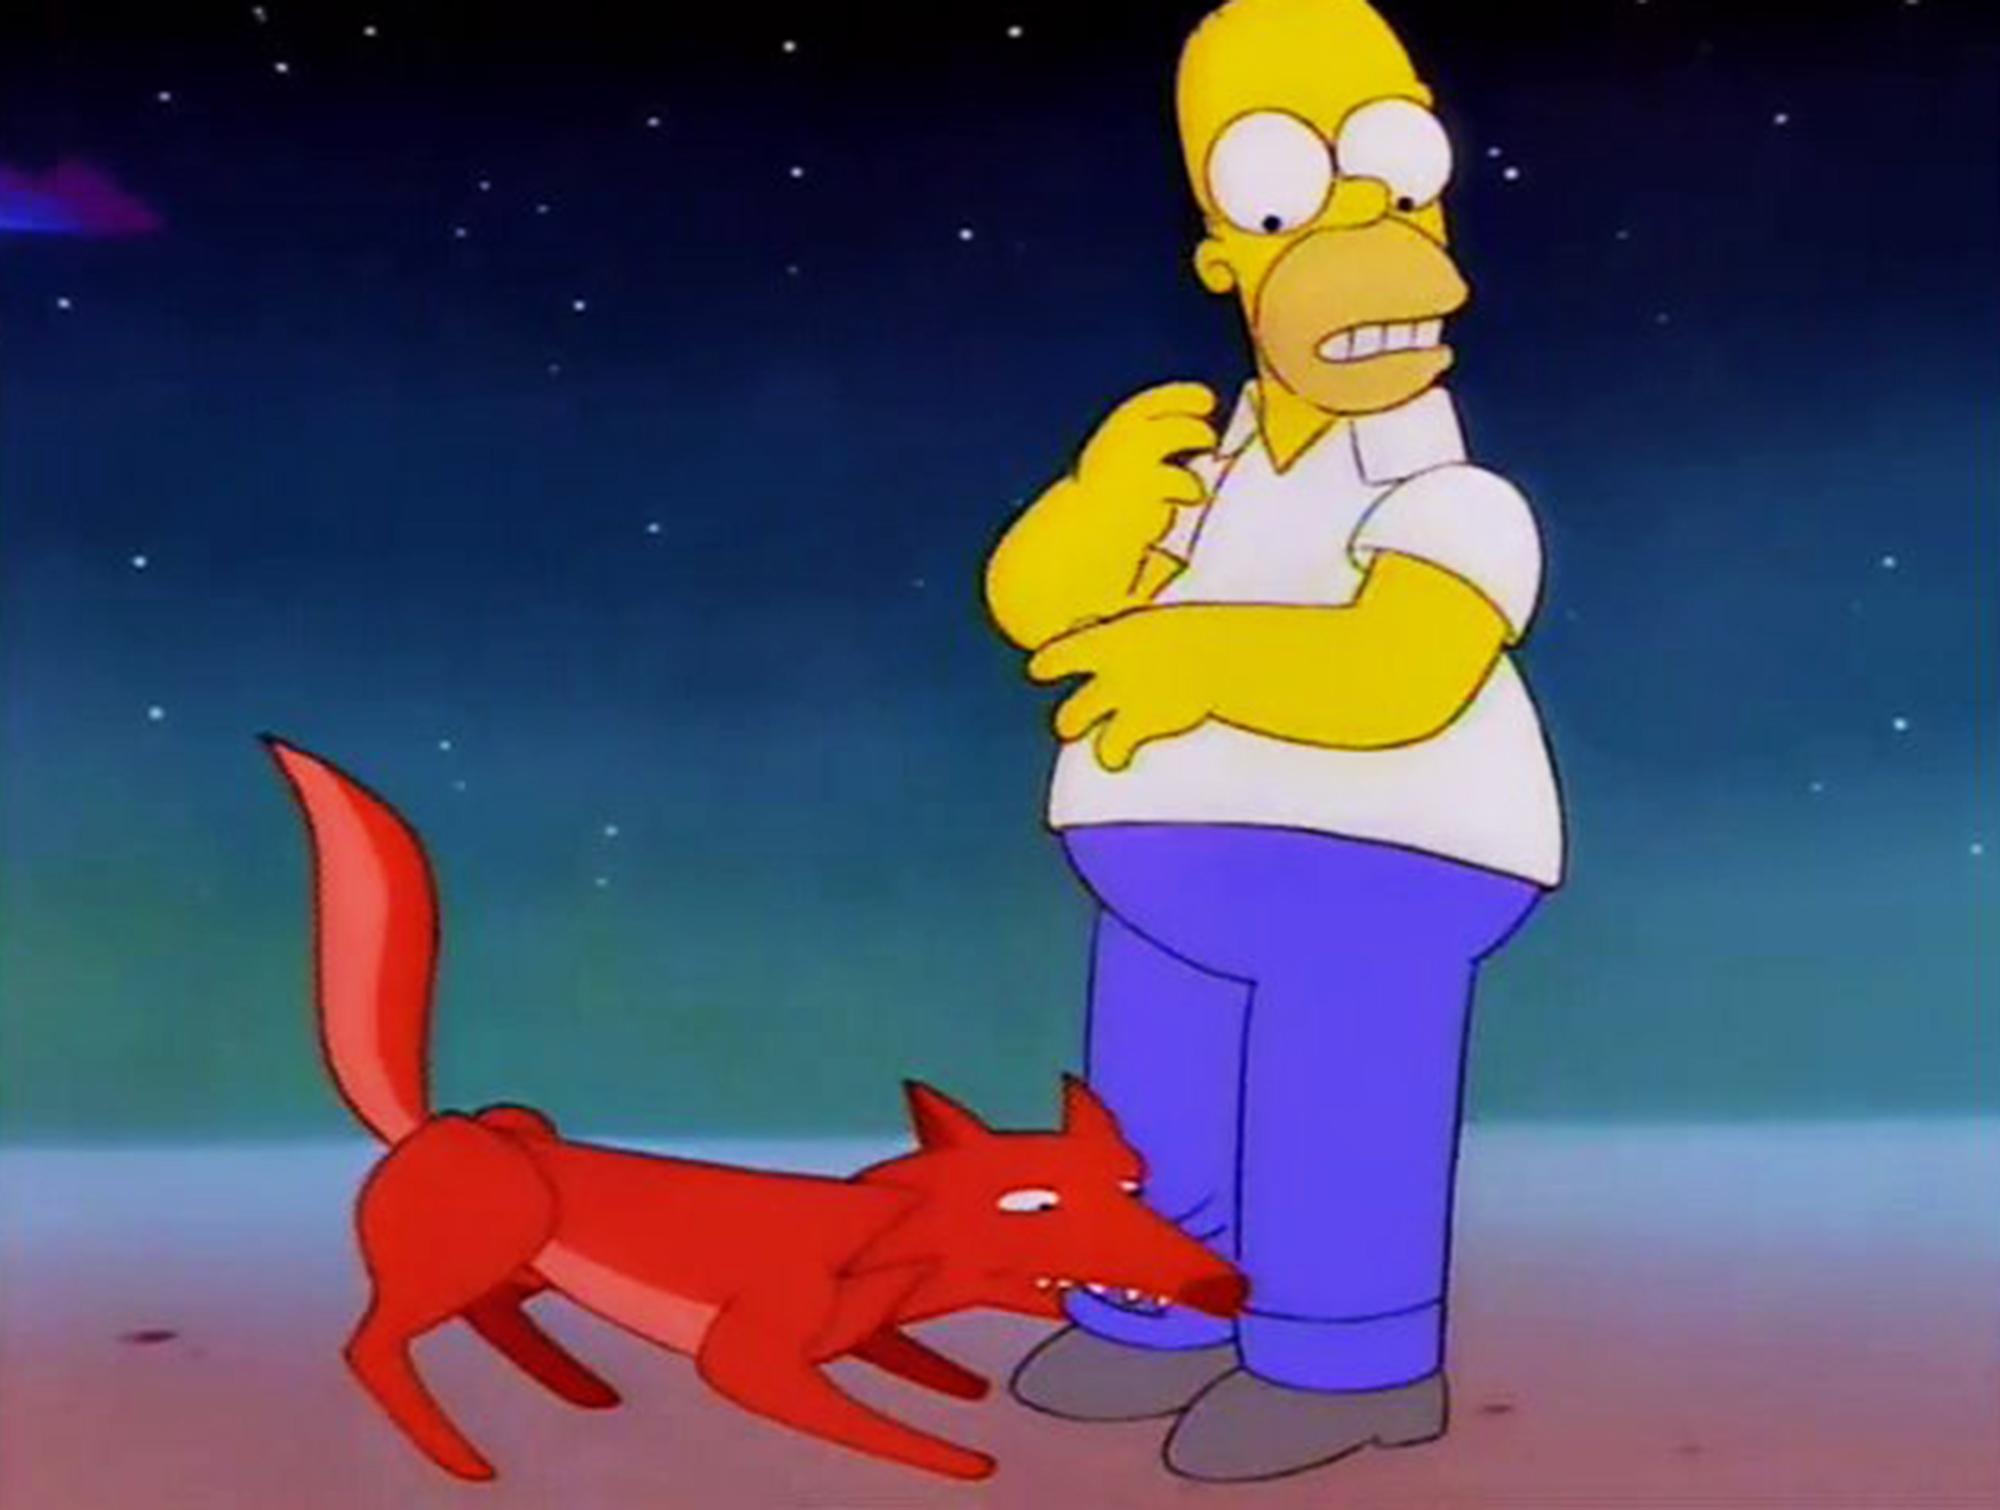 Johnny Cash: Cash notably guest starred as Homer’s Spirit Guide, the Space Coyote, who Homer meets in a Guatemalan pepper-fueled hallucination in the 1997 episode “El Viaje Misterioso de Nuestro Jomer (The Mysterious Voayage of Homer).”